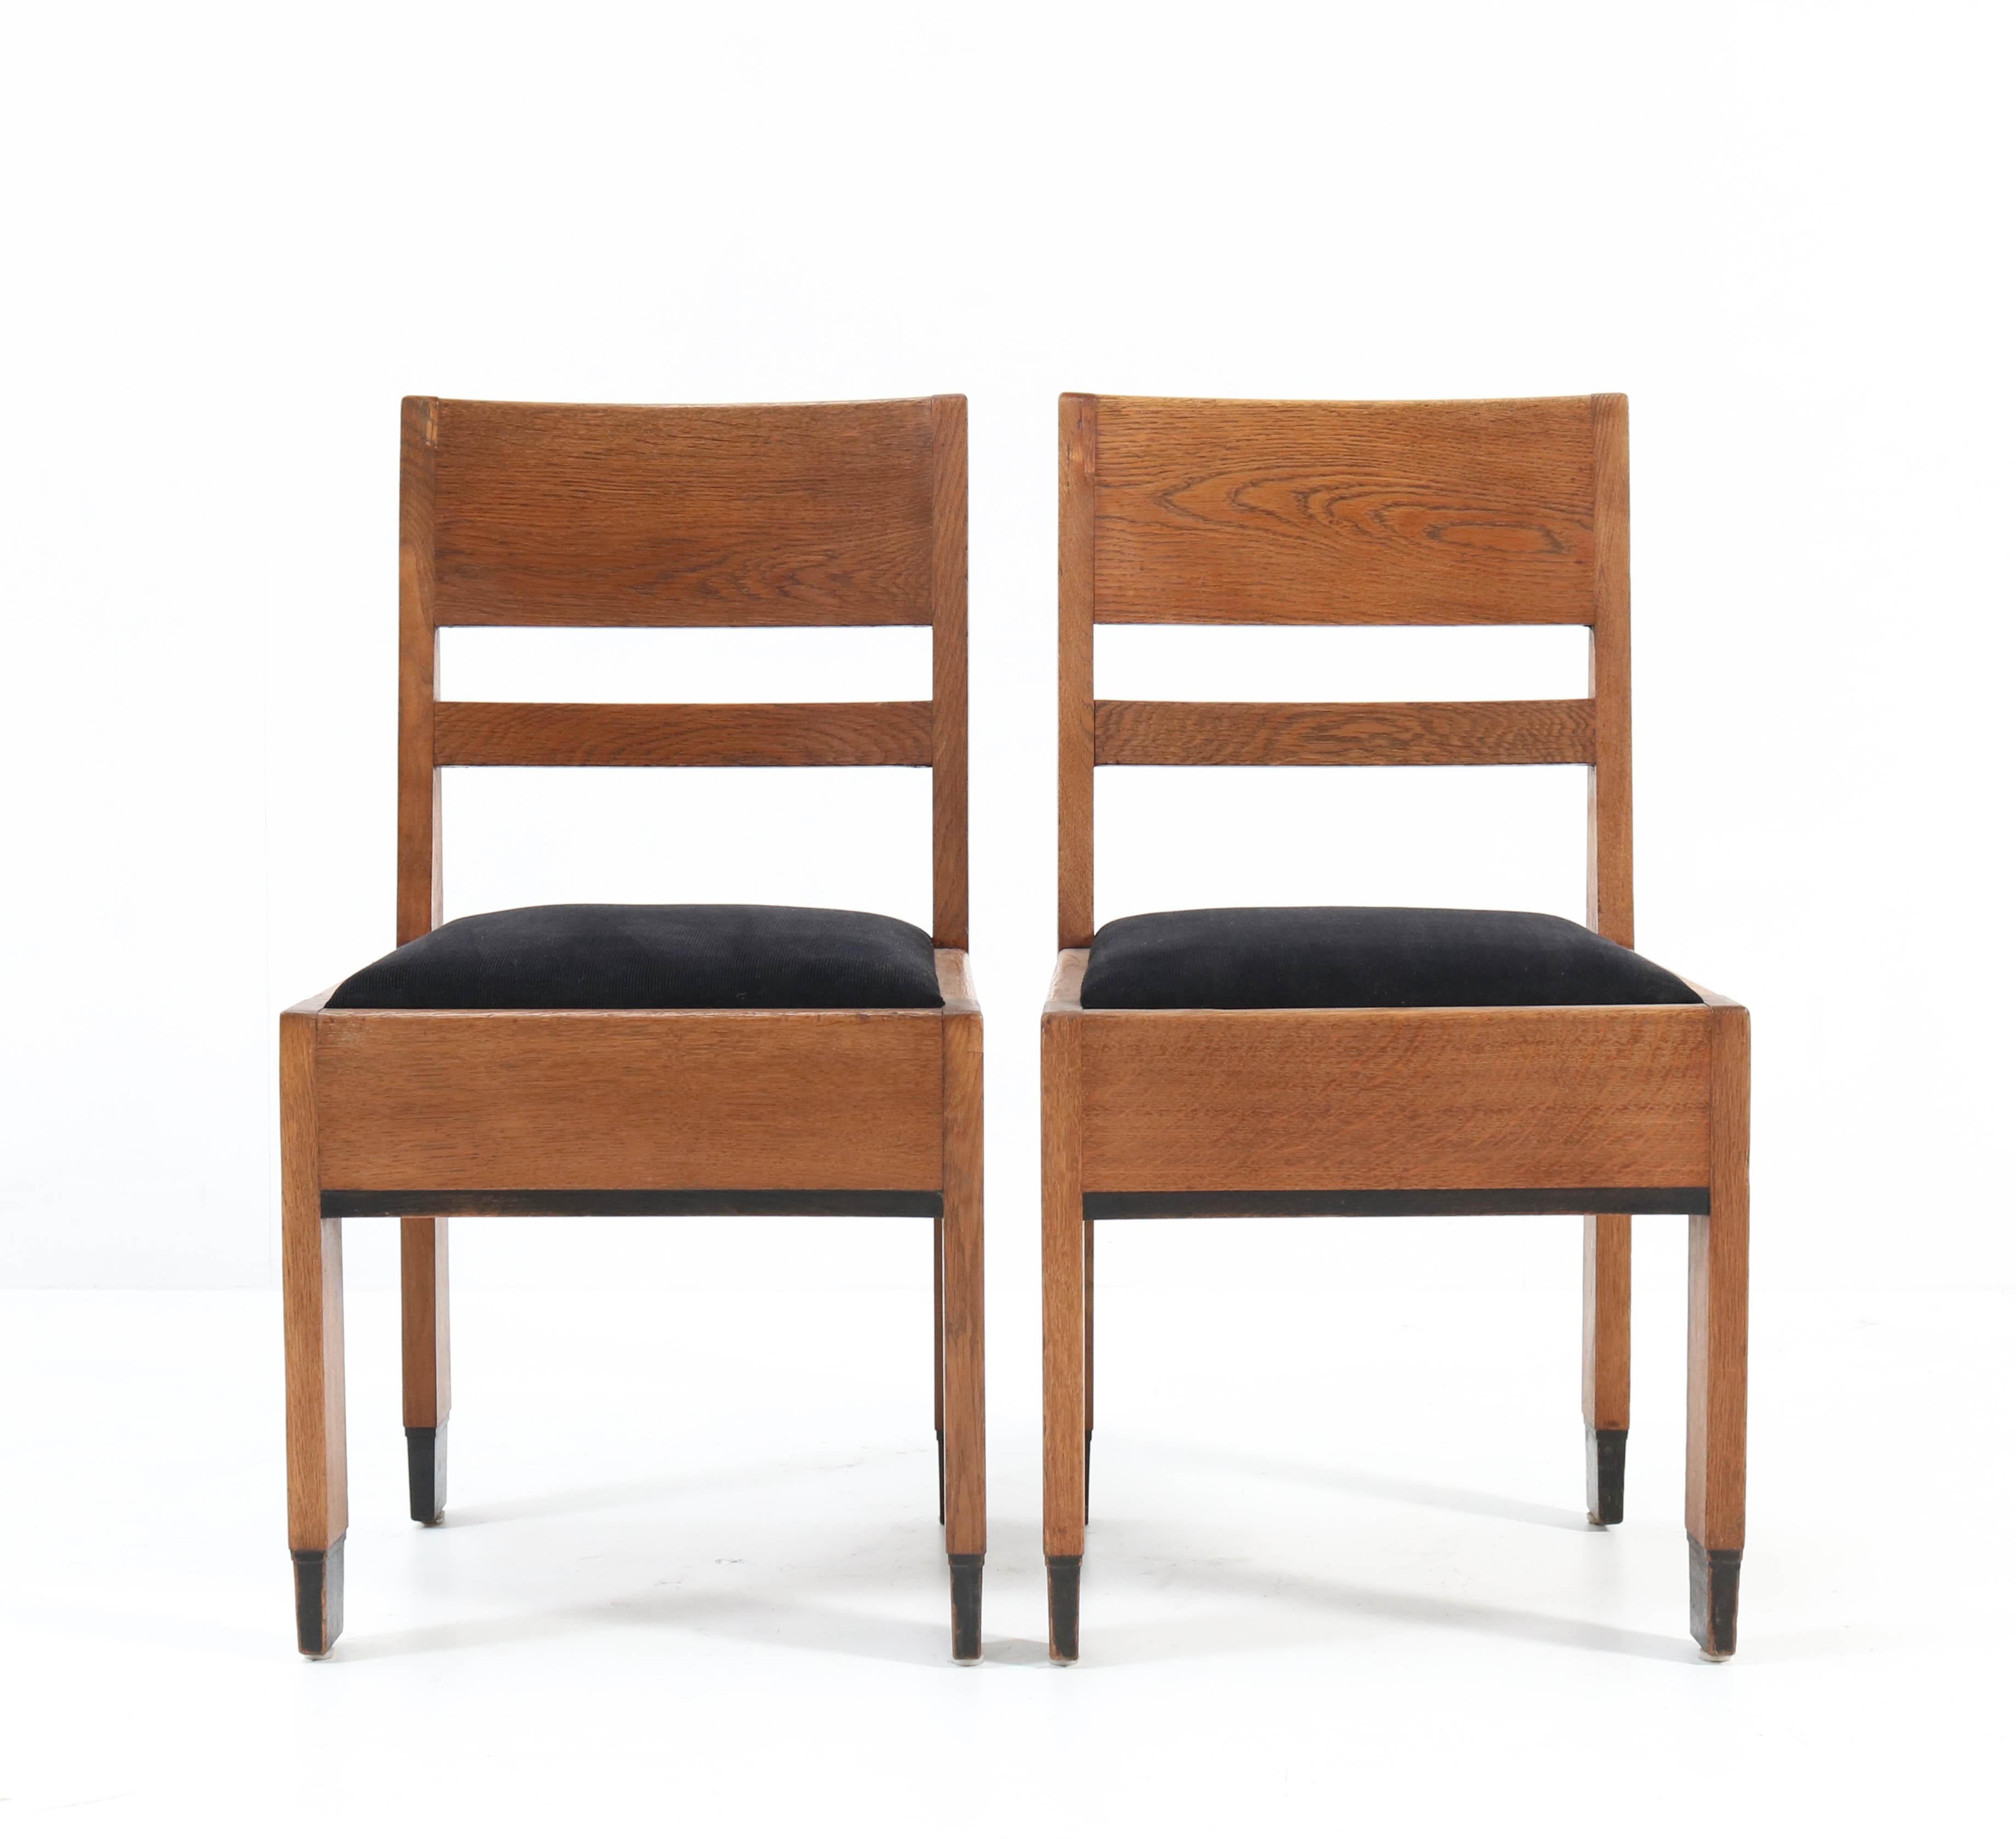 Fabric Eight Oak Art Deco Haagse School Chairs by H. Fels for L.O.V. Oosterbeek, 1924